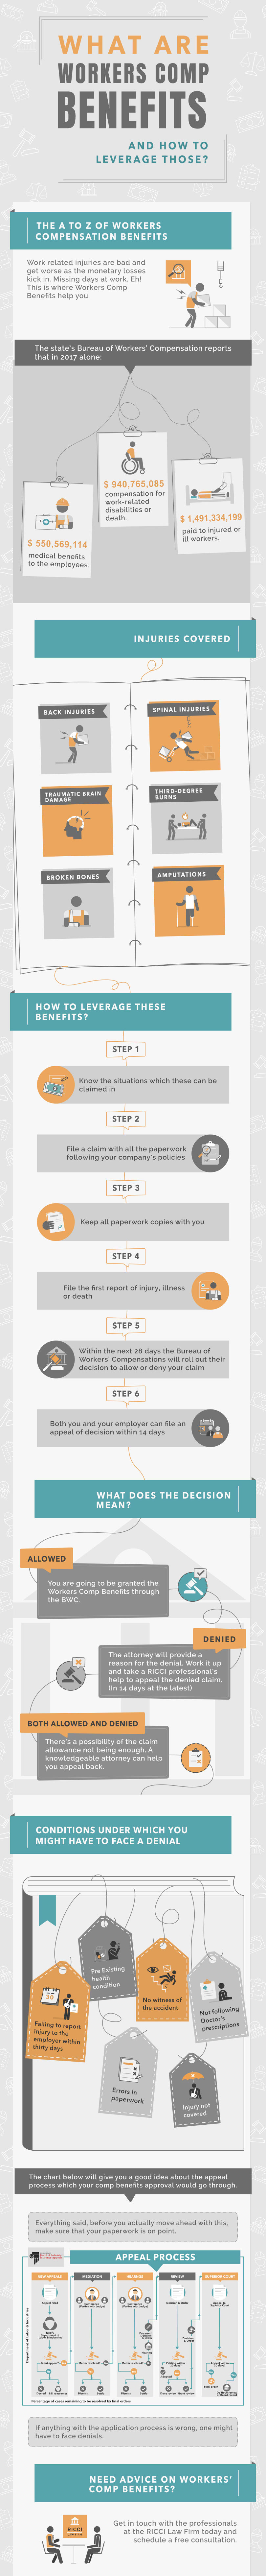 Workers compensation benefit infographic by Ricci Law Firm, P.A.